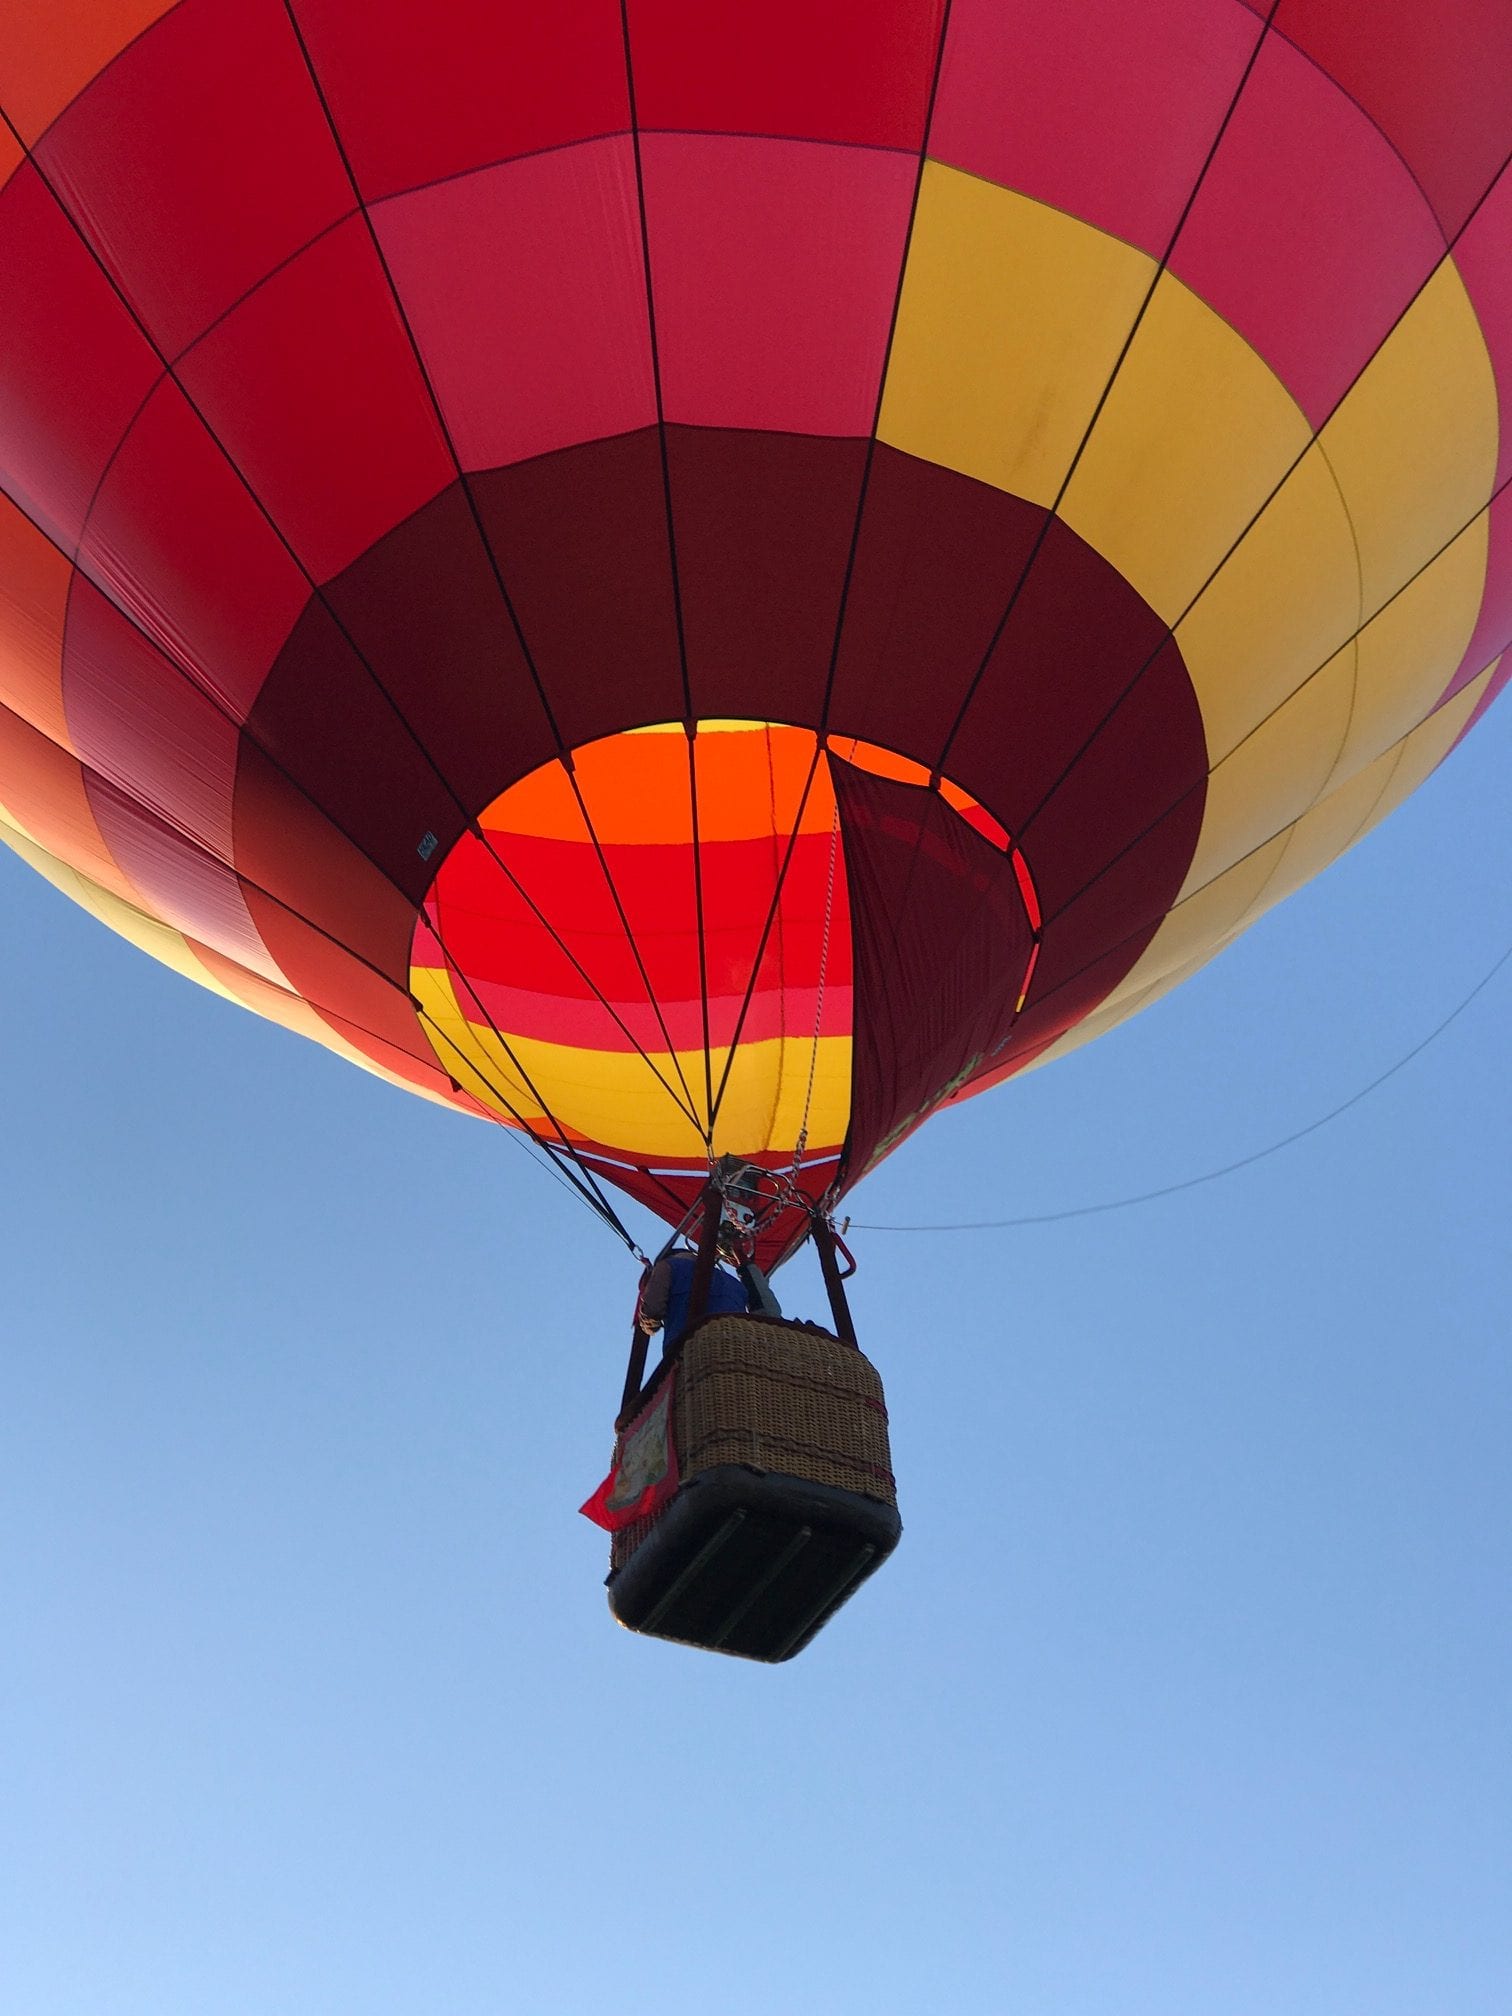 Everything you need to know about attending Albuquerque International Balloon Fiesta, the most photographed event in the world. Tips for photography and pictures to inspire a fall New Mexico road trip. A true Bucket list event -- this hot air balloon festival is both family friendly and amazing for Instagram photographers to capture the colorful glow. #bucketlists #newmexico #nm #albuquerque #usa #states